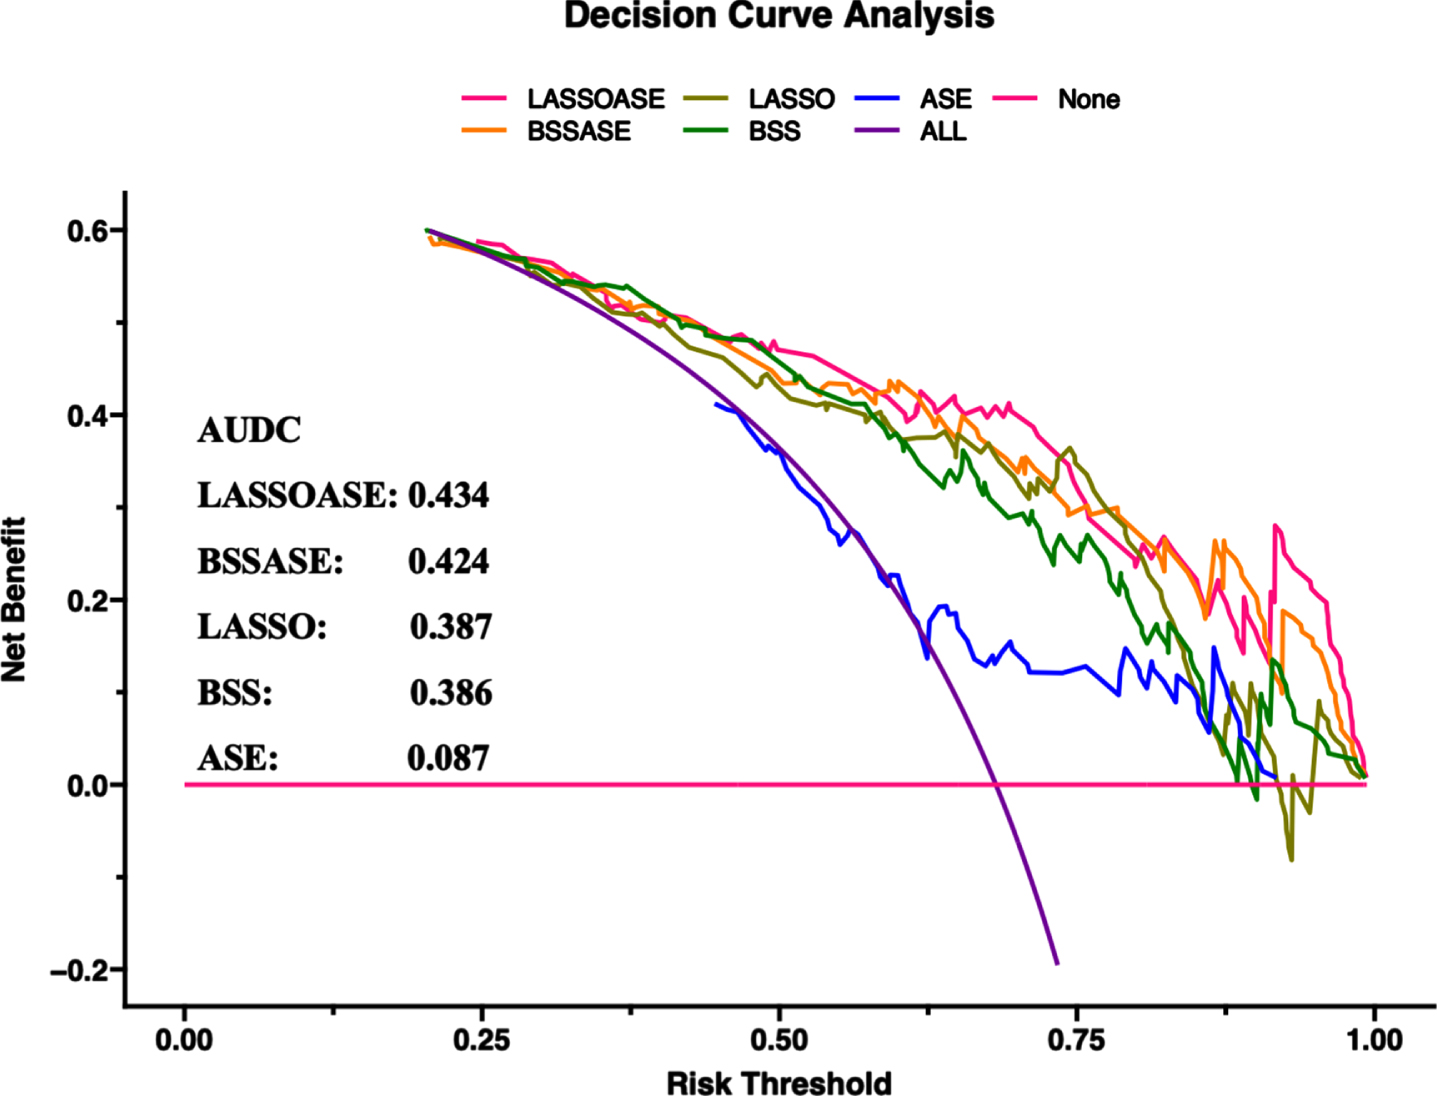 DCA comparing the benefits of multiple models. Models: LASSOASE: includes methylation level of markers in the LASSO model, age, sex, and APOE; BSSASE: includes methylation level of markers in the BSS model, age, sex, and APOE; LASSO: includes methylation level of 8 markers in the LASSO model; BSS: includes methylation level of 2 markers in the BSS model; ASE: includes age, sex, and APOE. AUDC, area under DCA; BSS, best subset selection; DCA, decision curve analysis; LASSO, Least absolute shrinkage and selection operator.